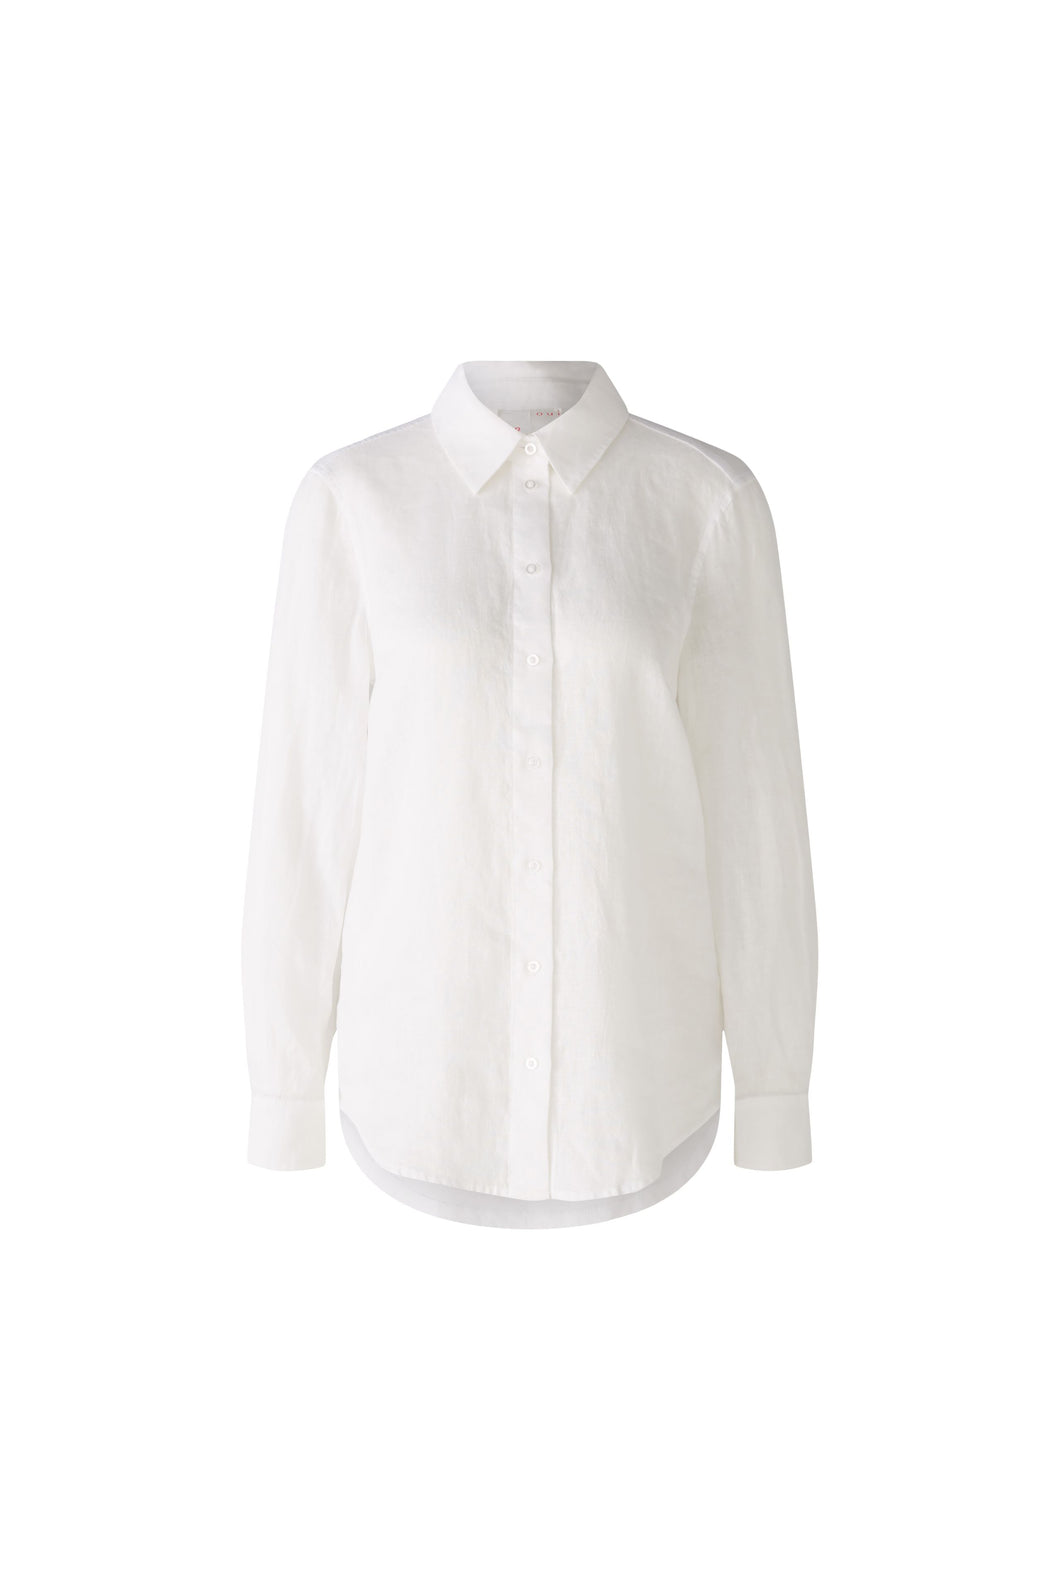 Oui - Blouse Linen Cotton Patch in White